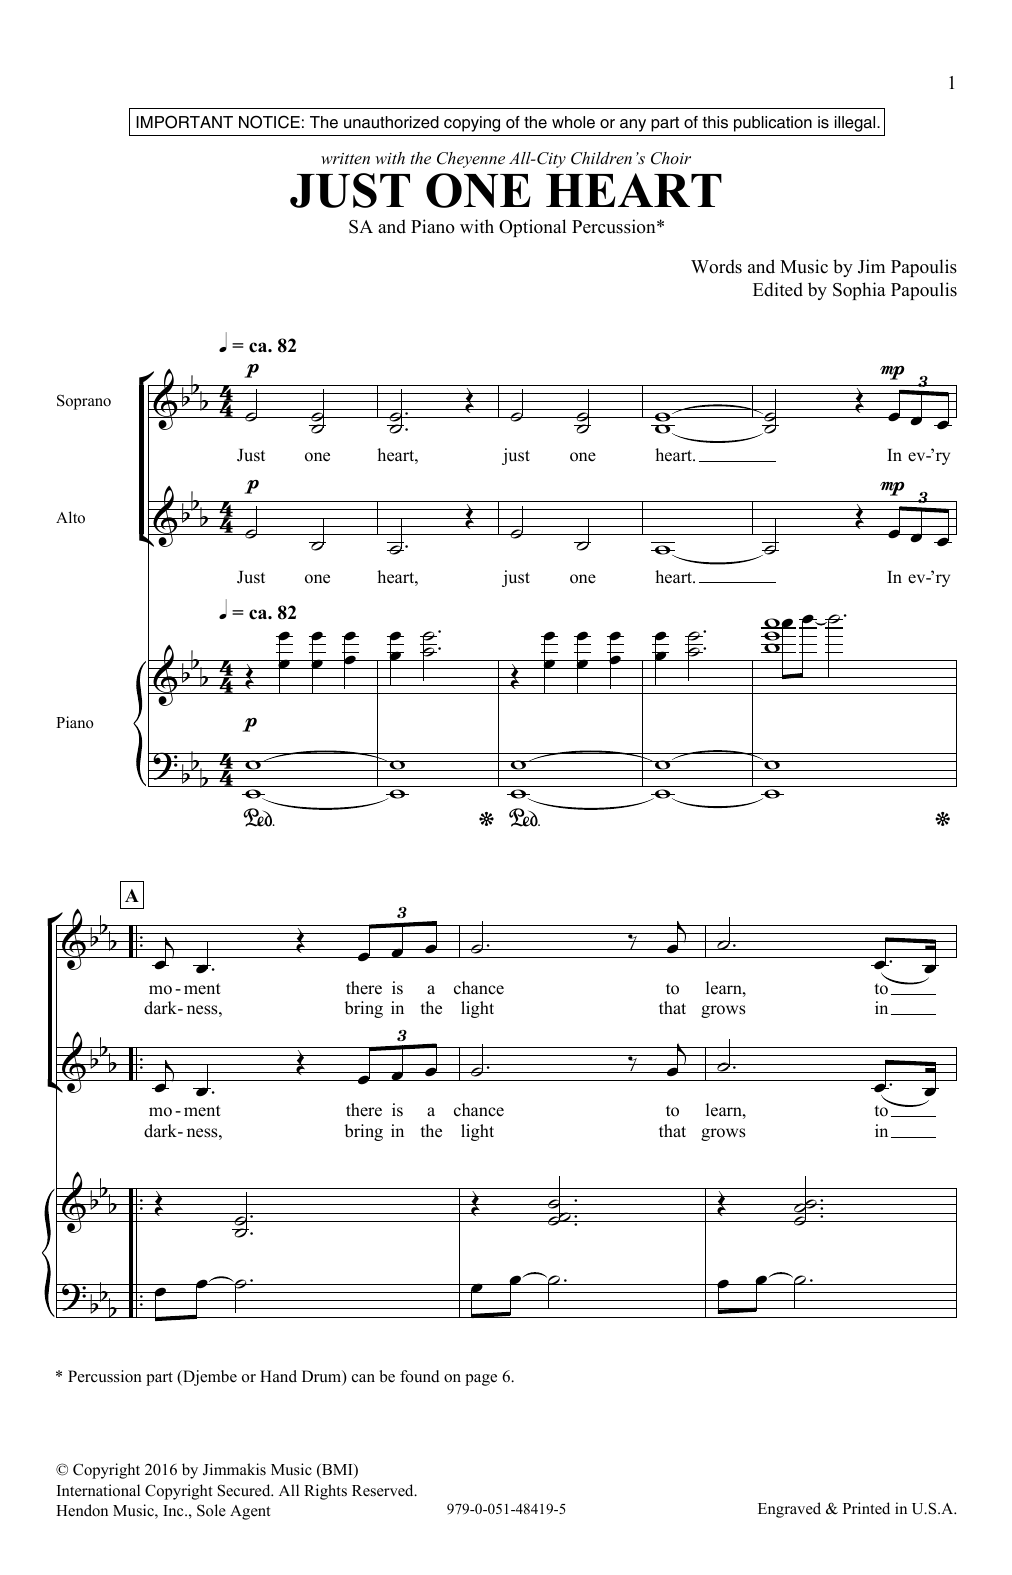 Download Jim Papoulis Just One Heart Sheet Music